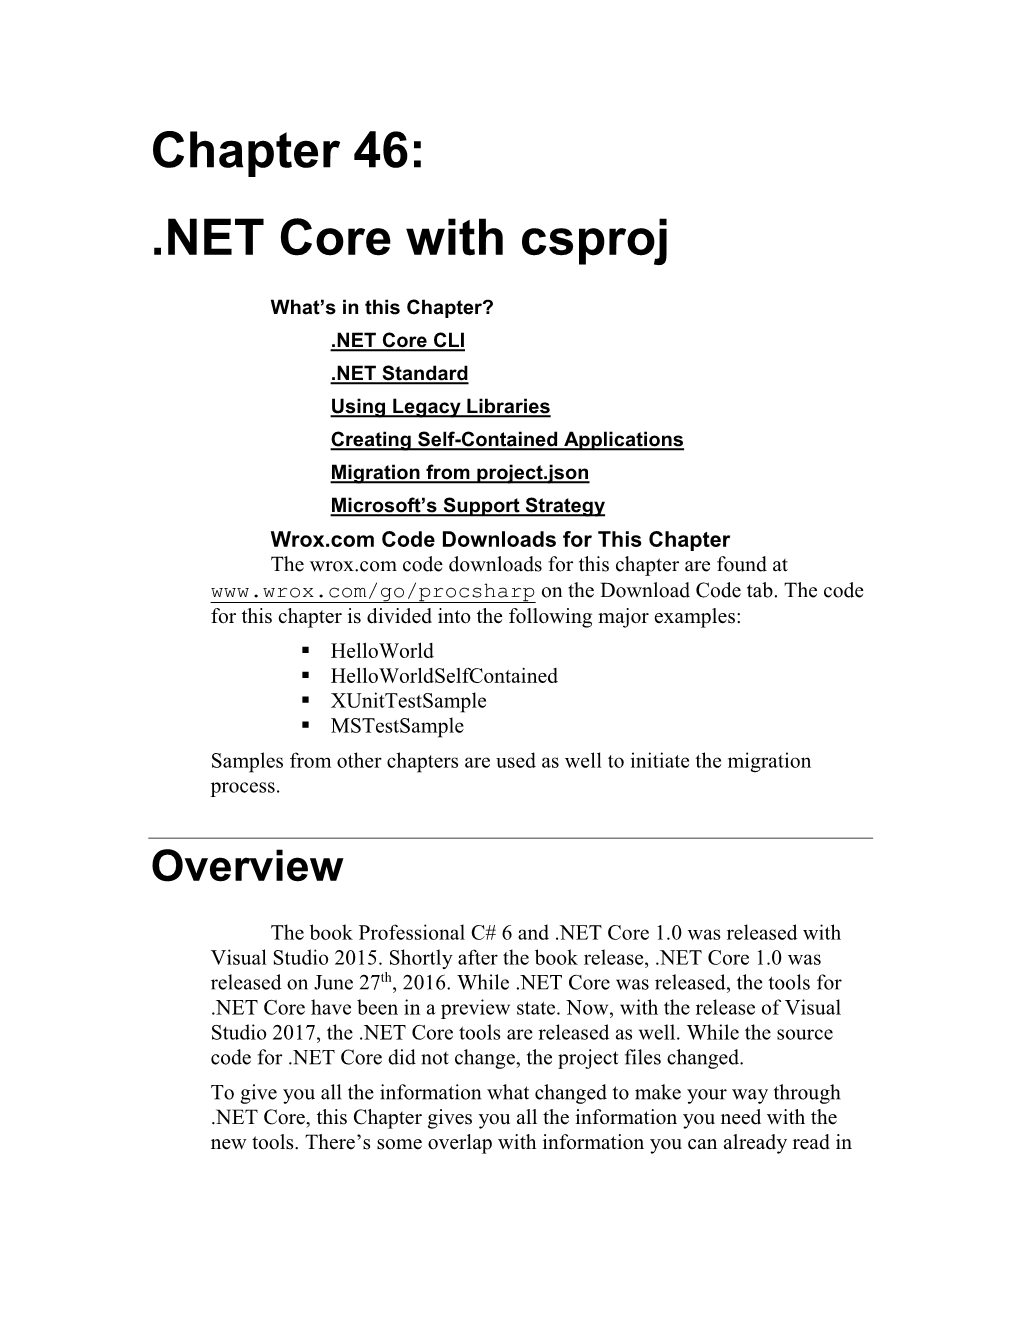 Chapter 46: .NET Core with Csproj